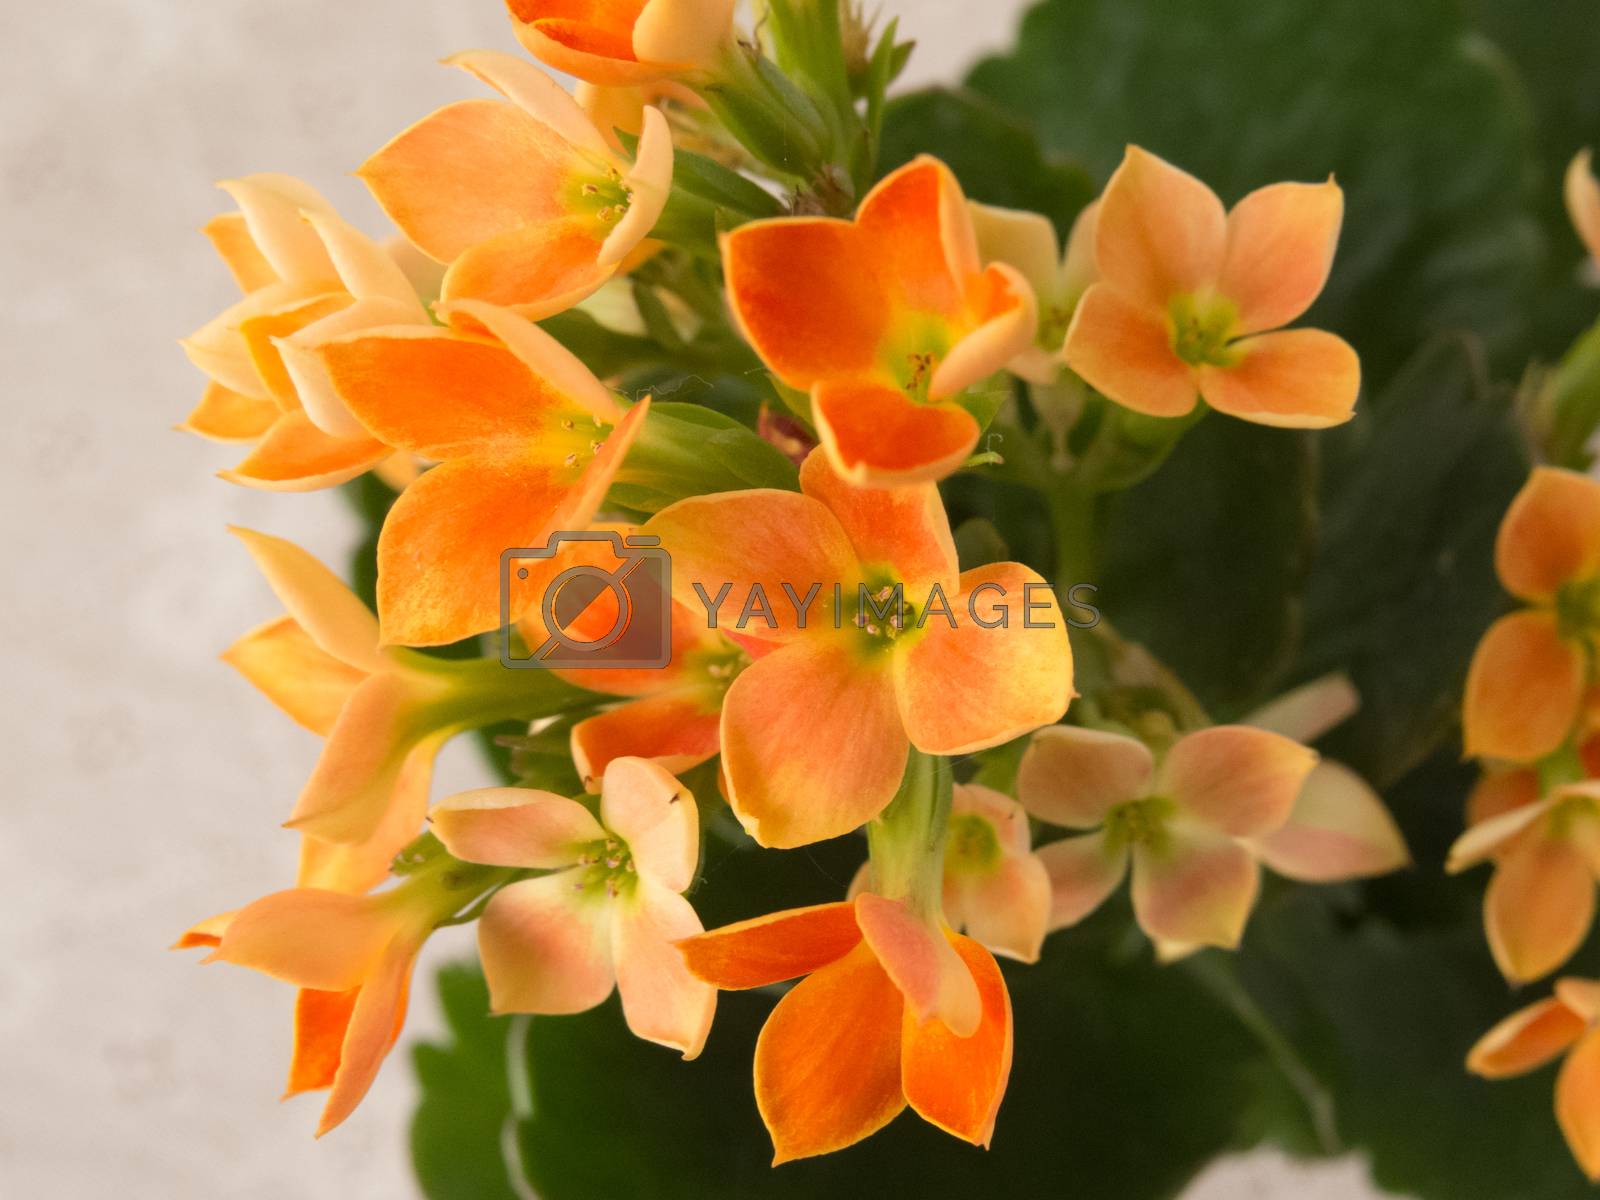 Royalty free image of Delicate Kalanchoe blossfeldiana blooming orange color with green leaves on white background. by silviopl